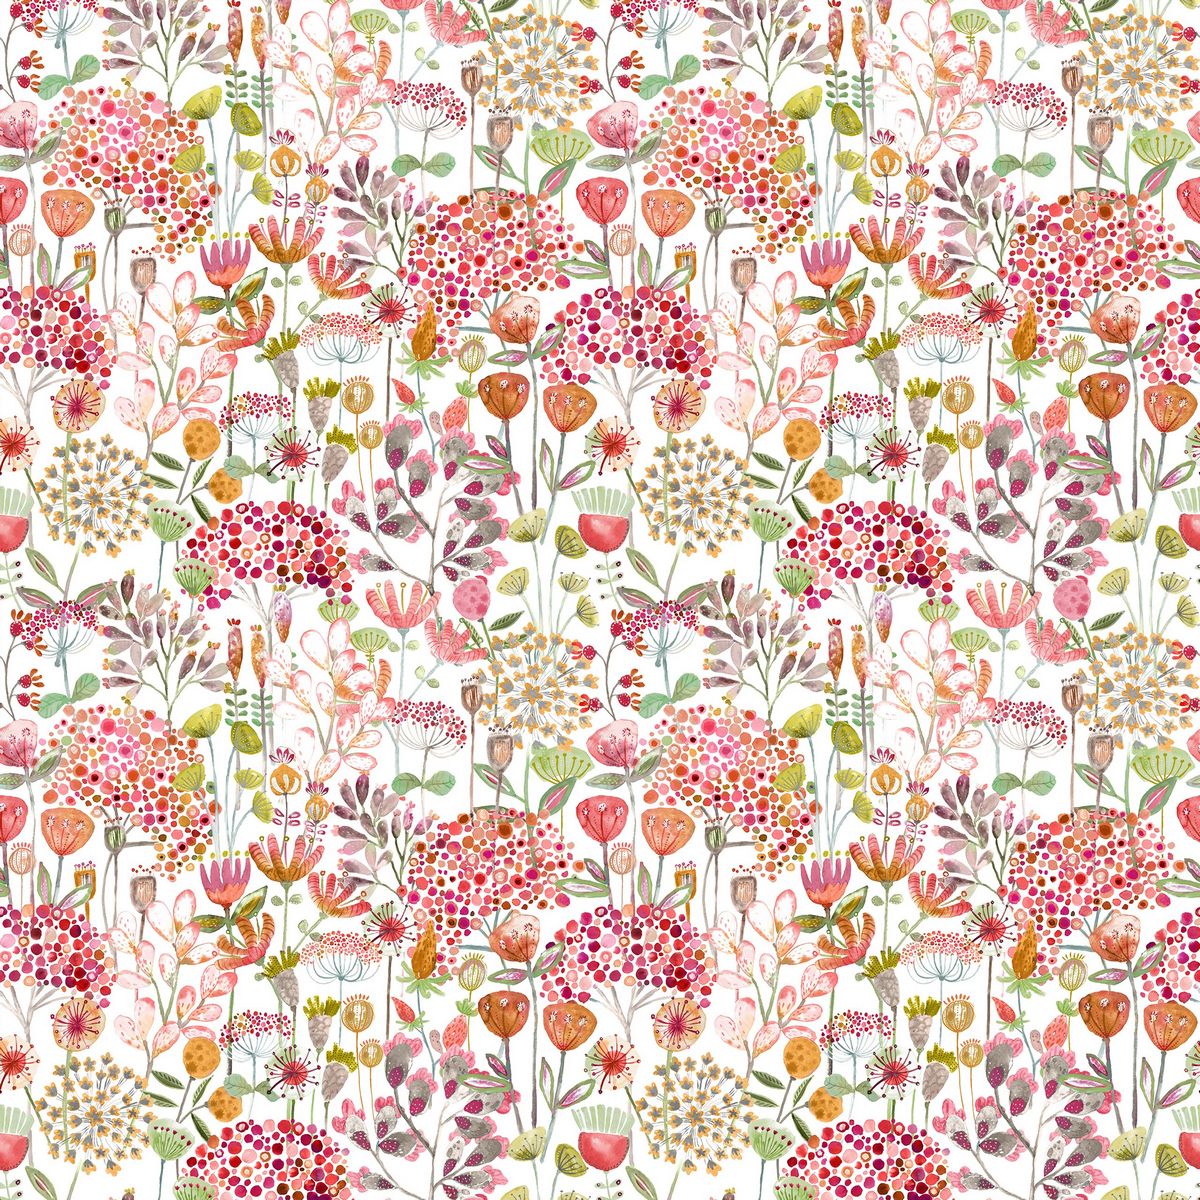 Ailsa Summer Fabric by Voyage Maison